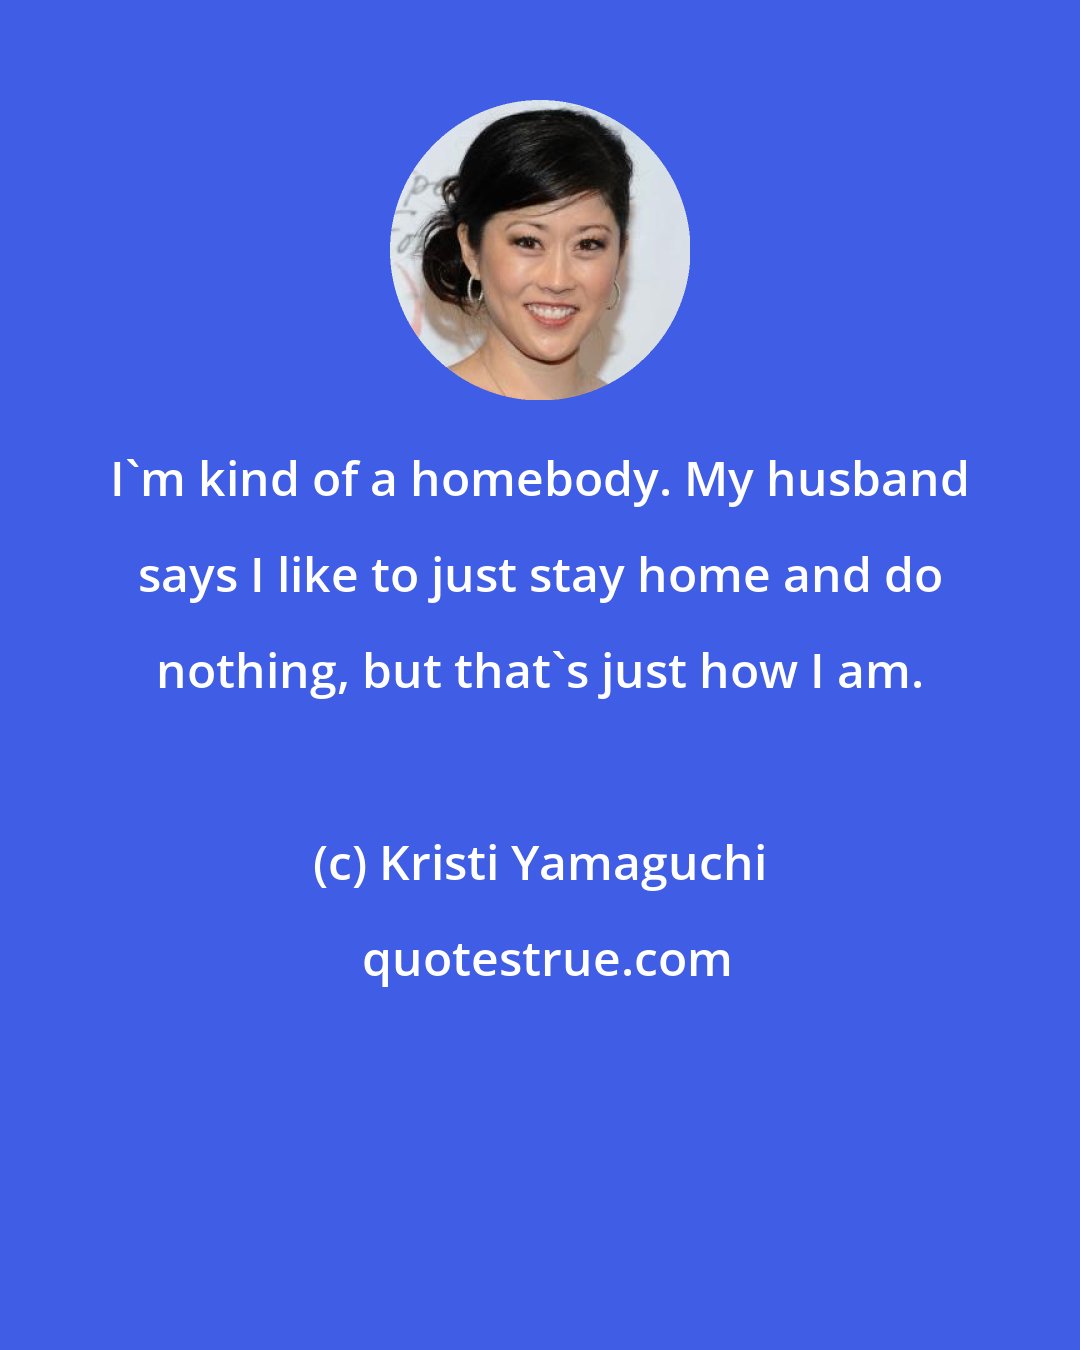 Kristi Yamaguchi: I'm kind of a homebody. My husband says I like to just stay home and do nothing, but that's just how I am.